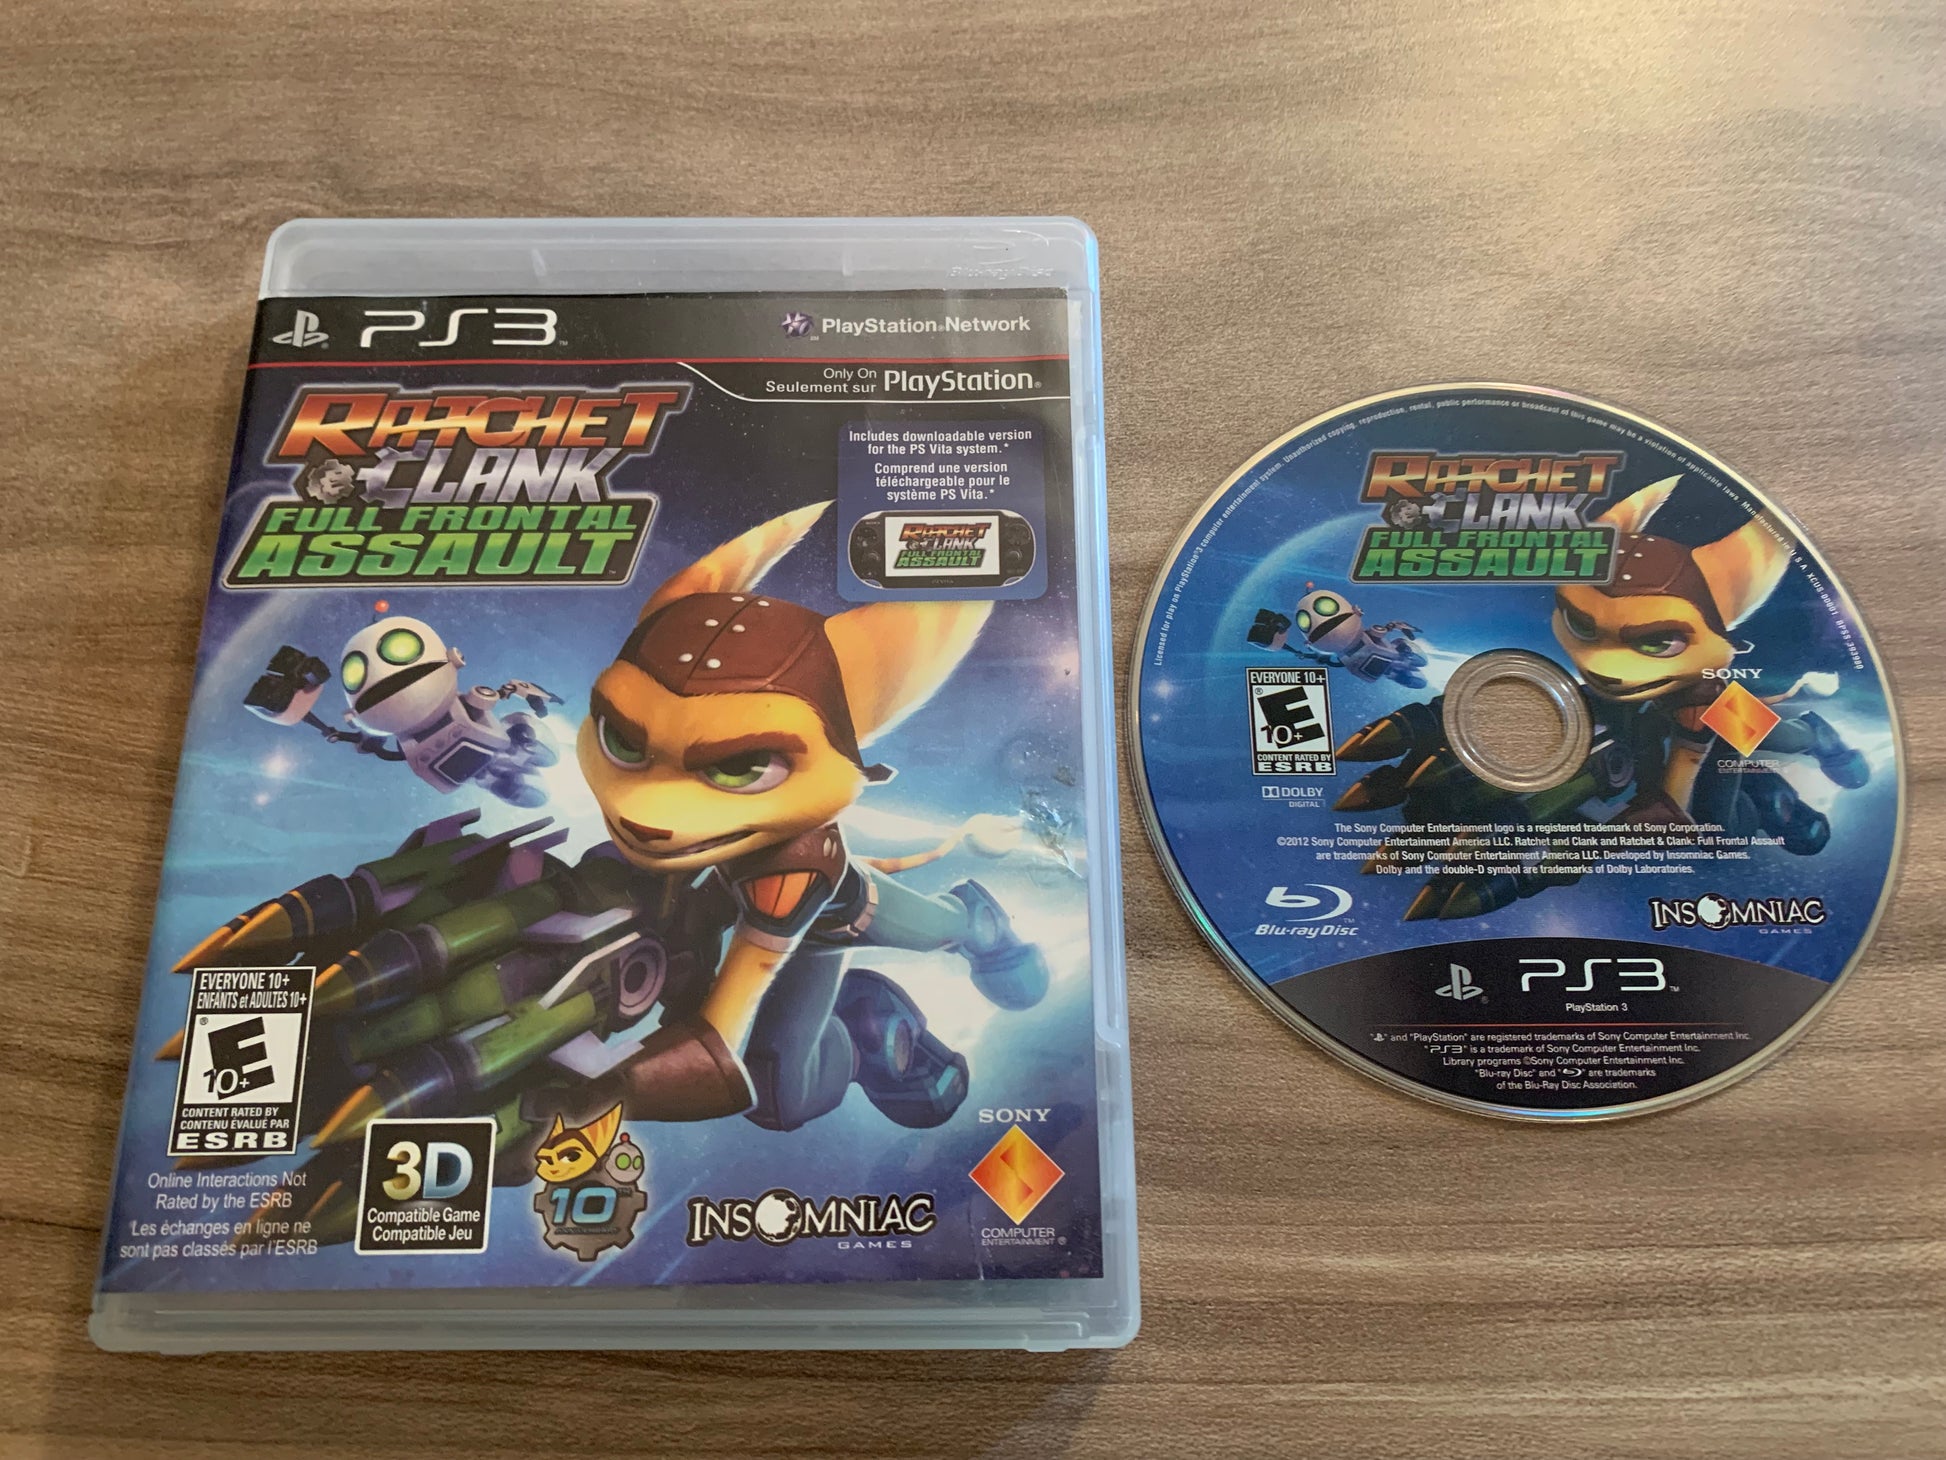 PiXELRETROGAME.COM : SONY PLAYSTATION 3 (PS3) COMPLET CIB BOX MANUAL GAME NTSC RATCHET CLANK FULL FRONTAL ASSAULT